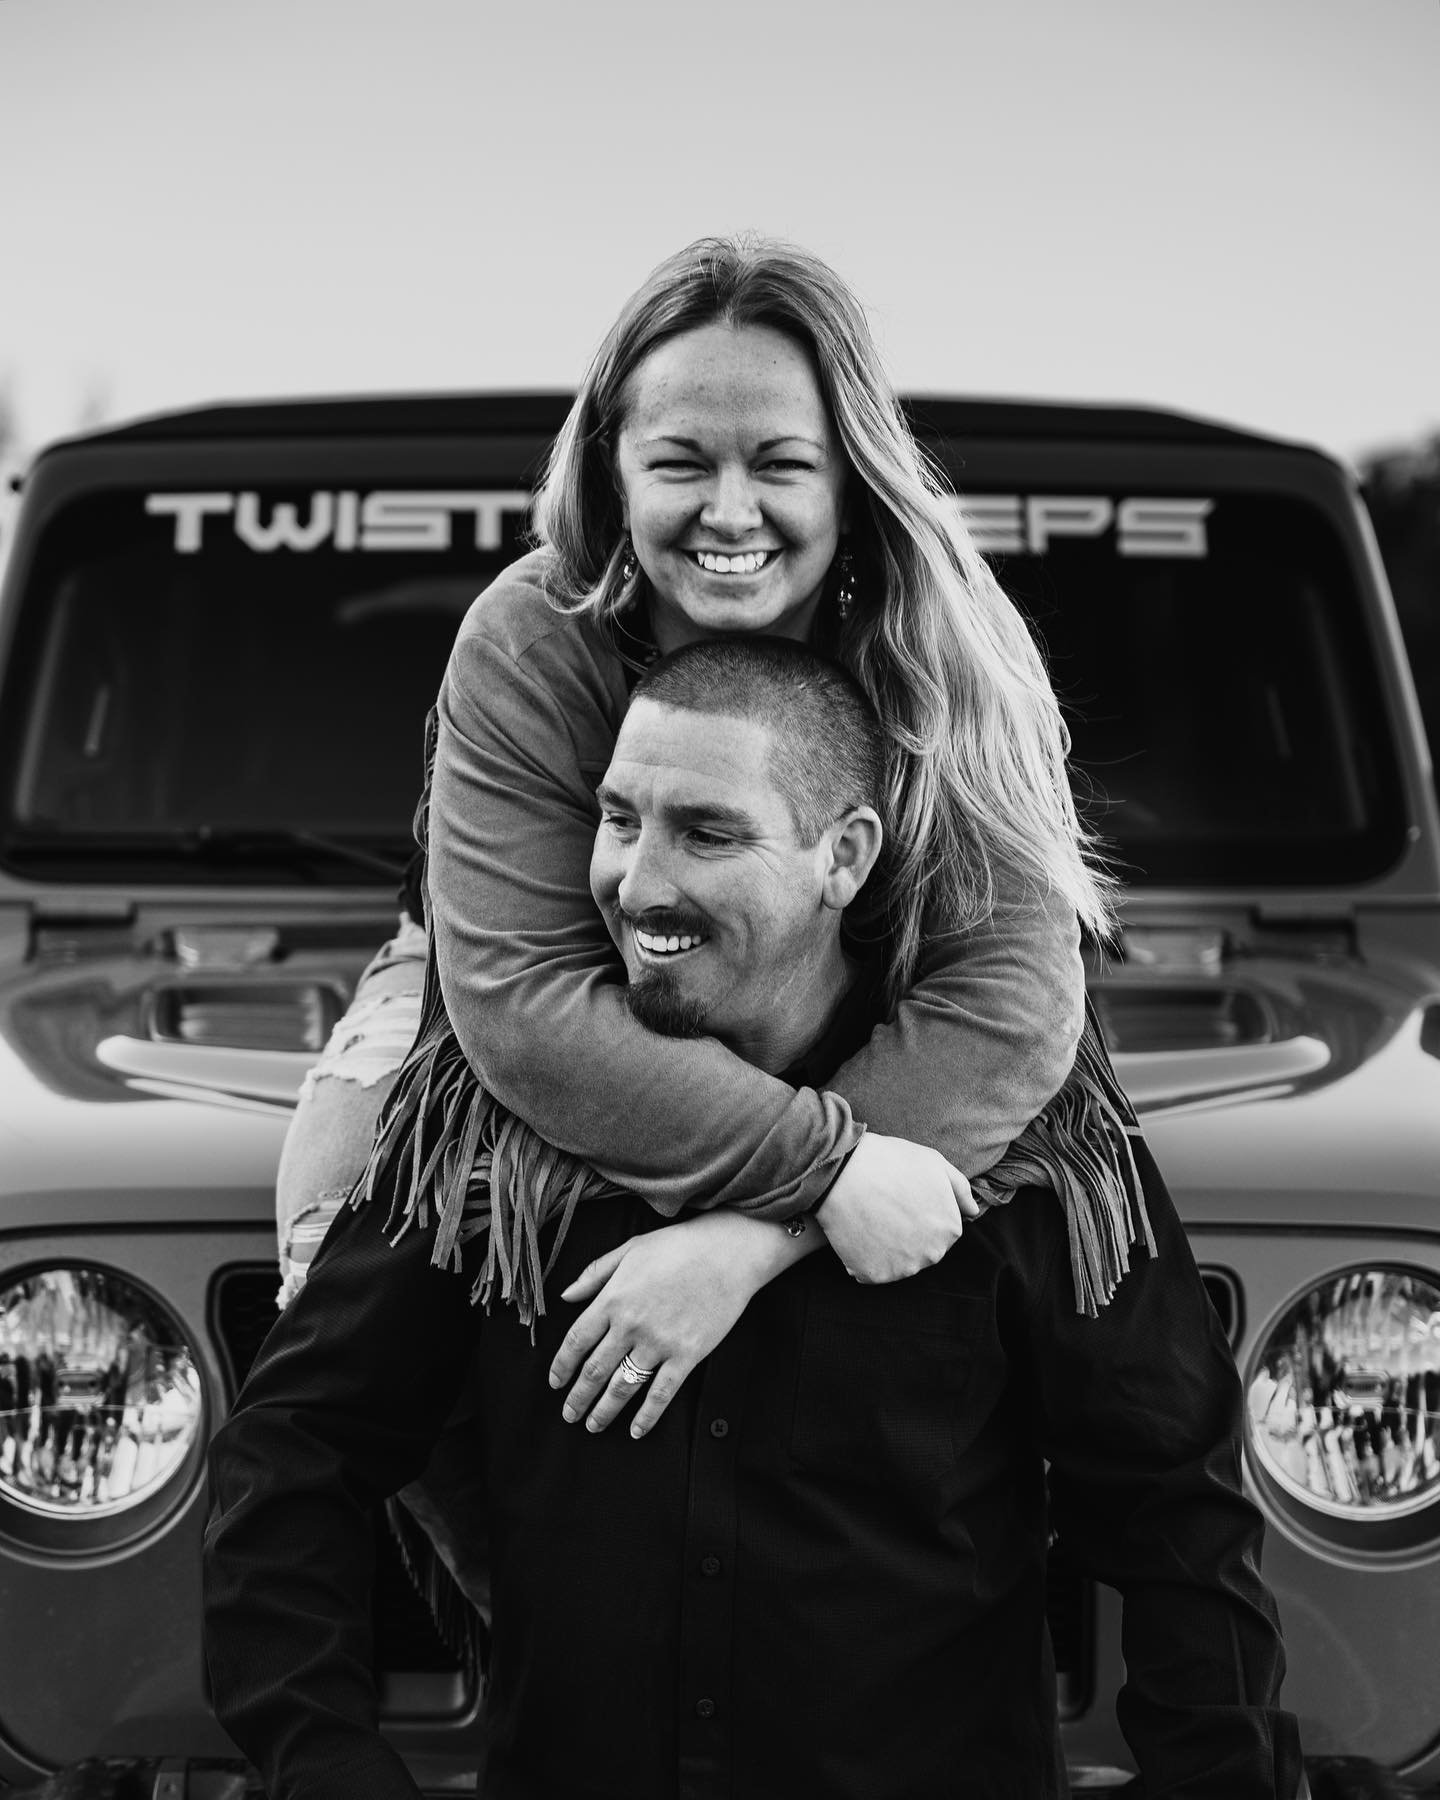 Kinda giving me &ldquo;The Fast and the Furious&rdquo; vibes but with a fun desert/western twist 🏜️ 

Why not incorporate some of the things you love most + sentimental aspects of your story into your session???? 

.
.
.

#couples #bride #engagement